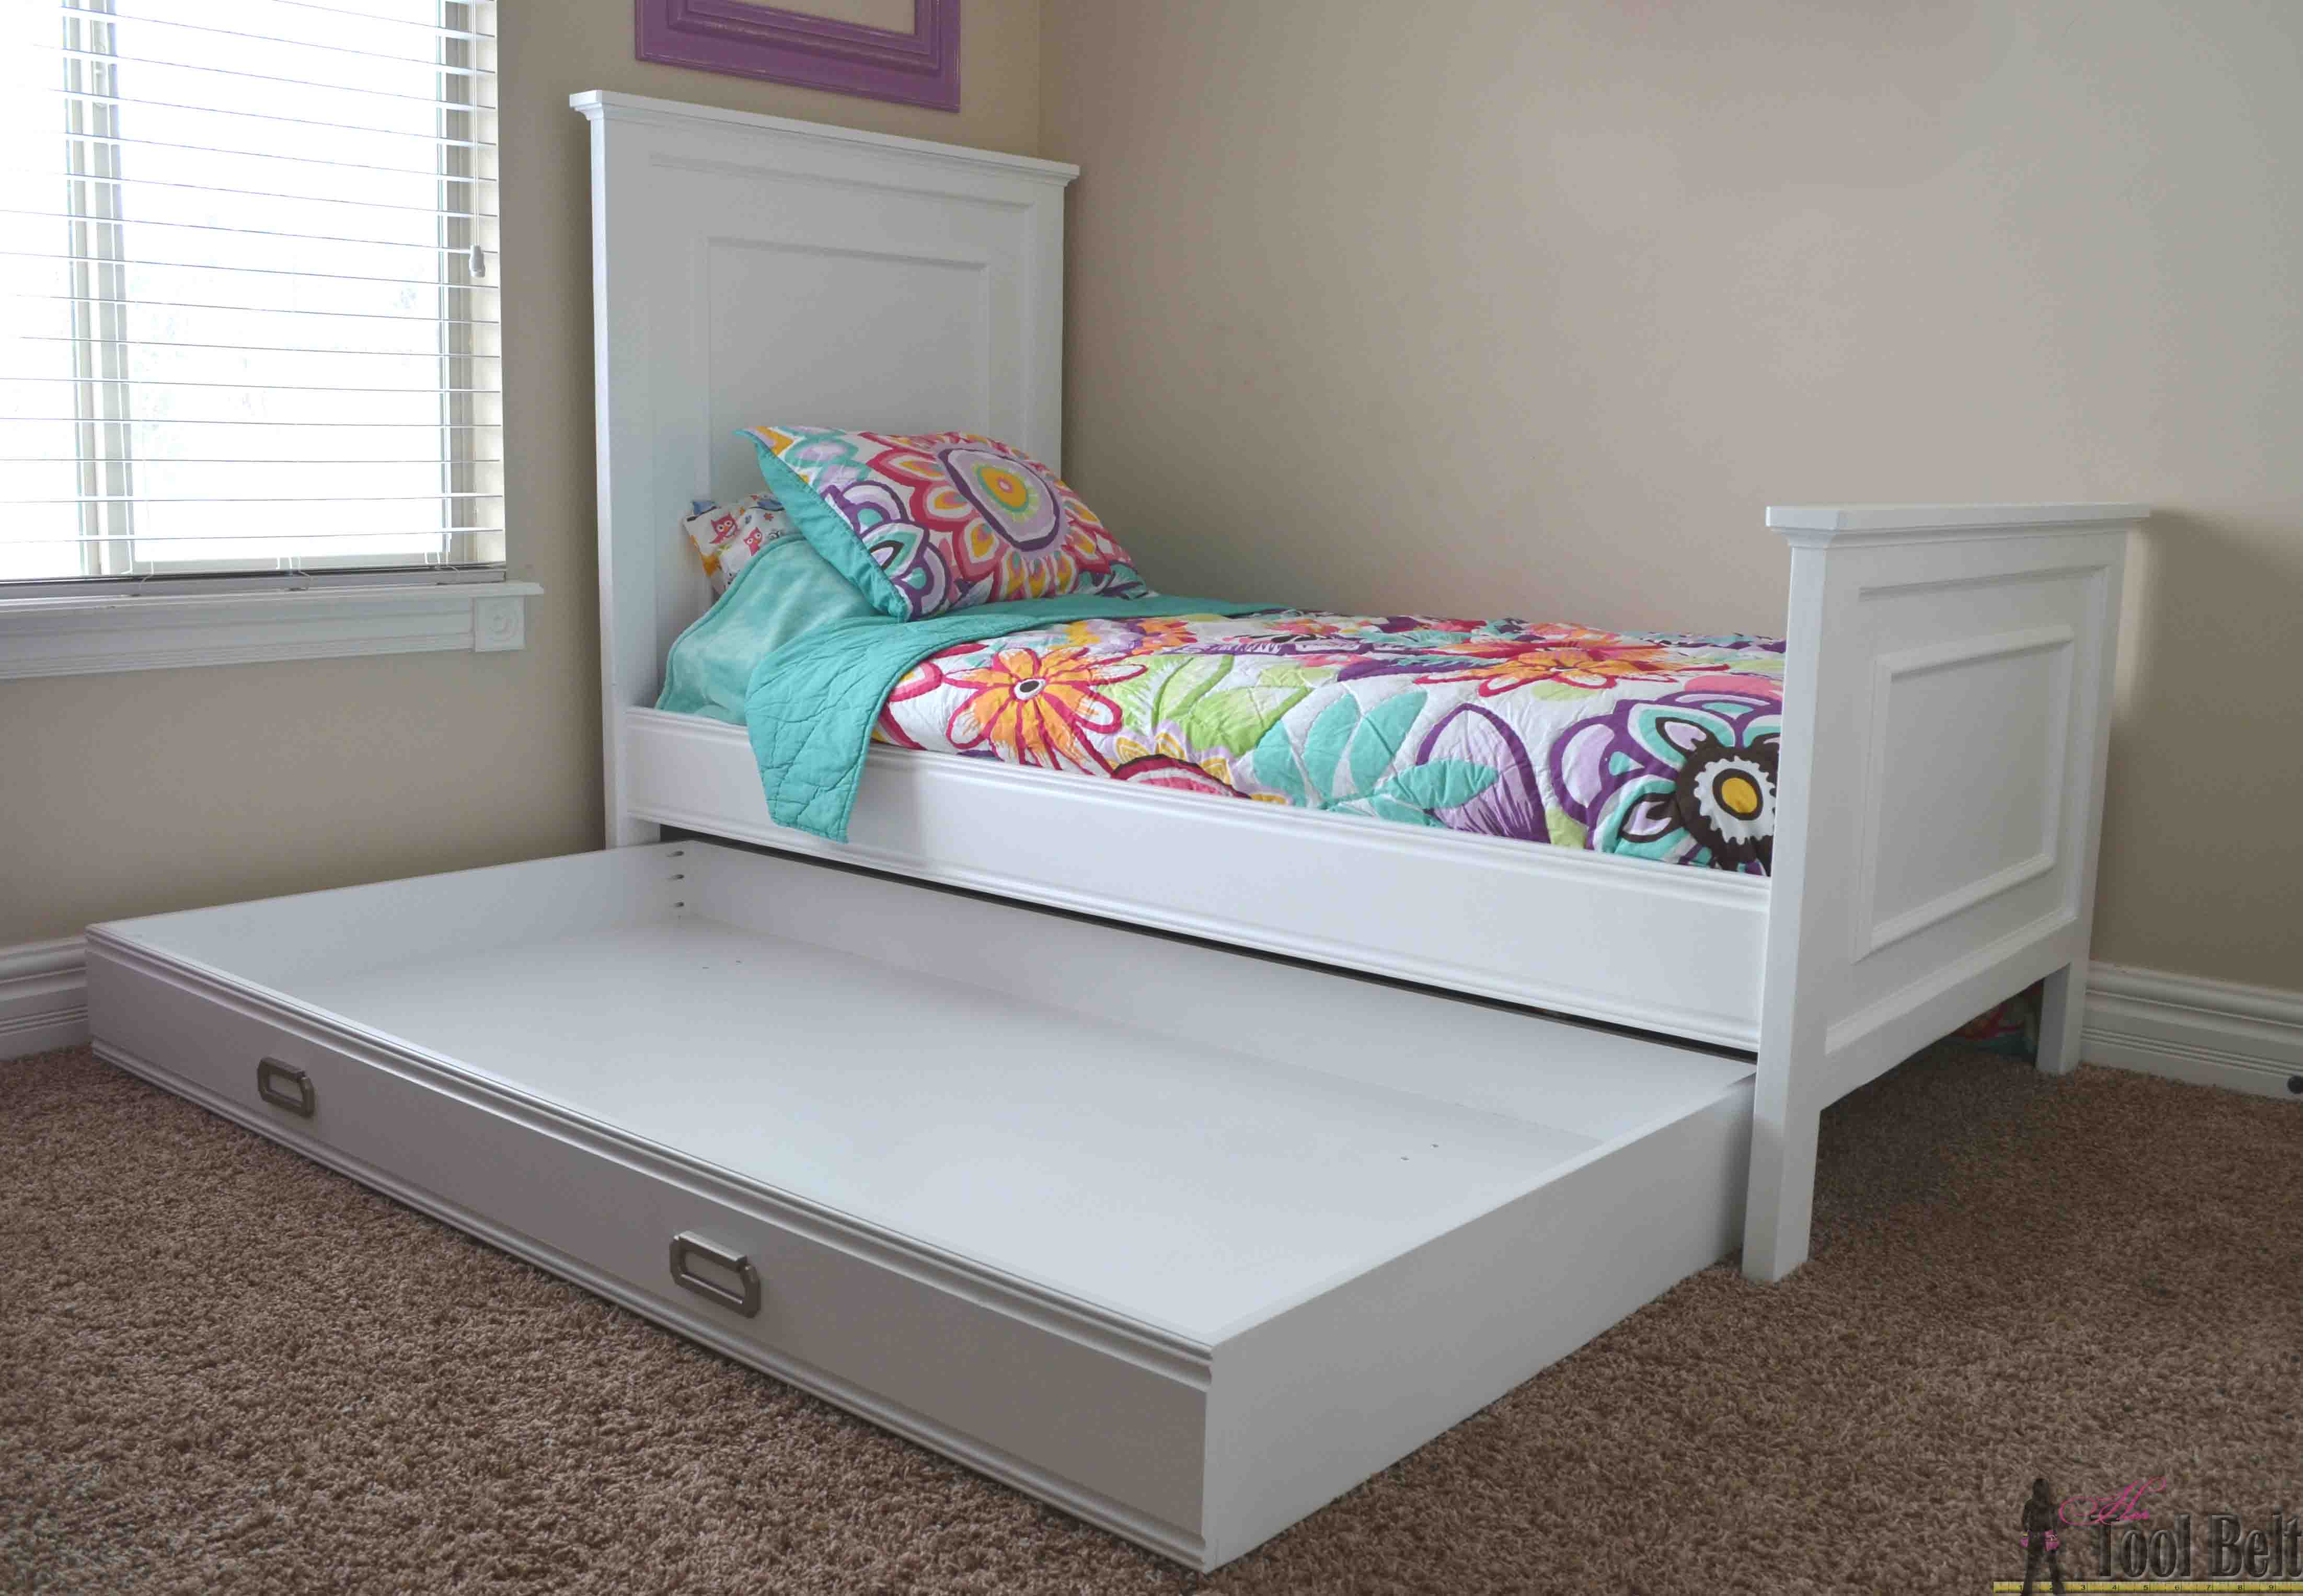 Simple Twin Bed Trundle Her Tool Belt, Twin Bed With Pull Out Bed Underneath